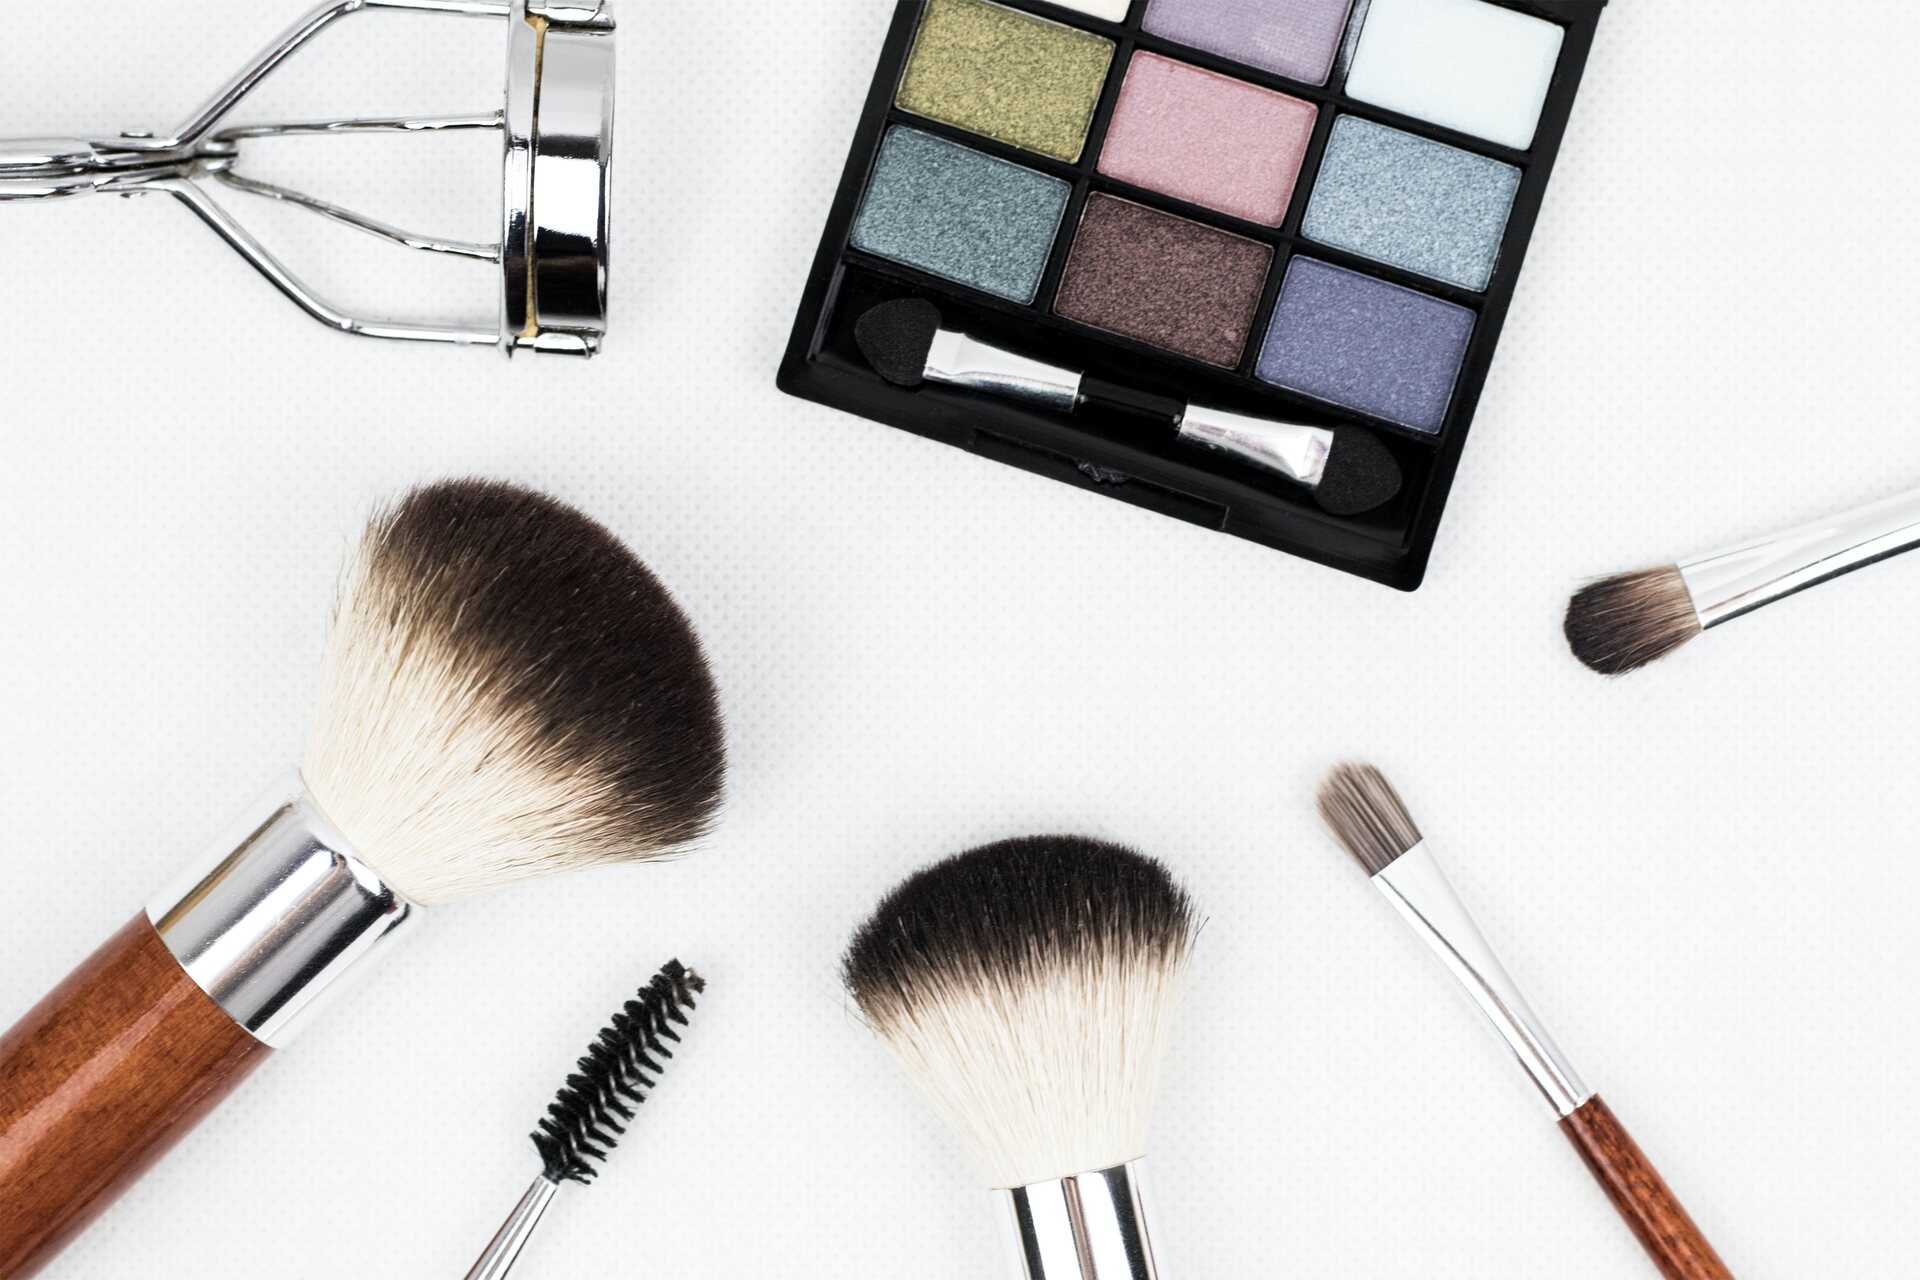 Makeup products and brushes